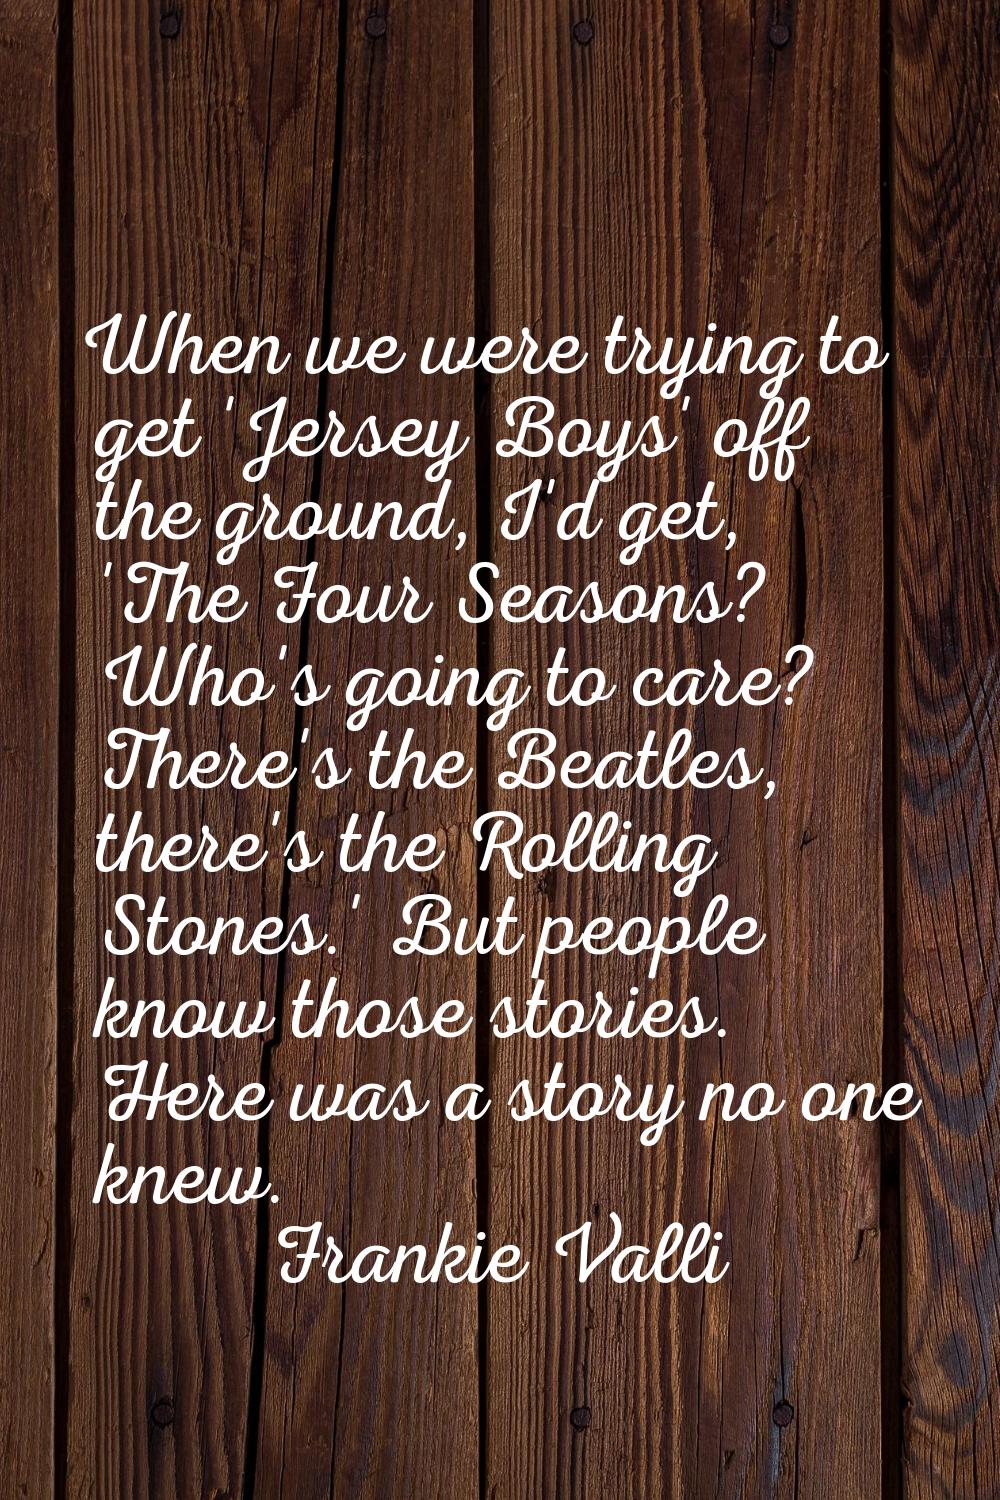 When we were trying to get 'Jersey Boys' off the ground, I'd get, 'The Four Seasons? Who's going to